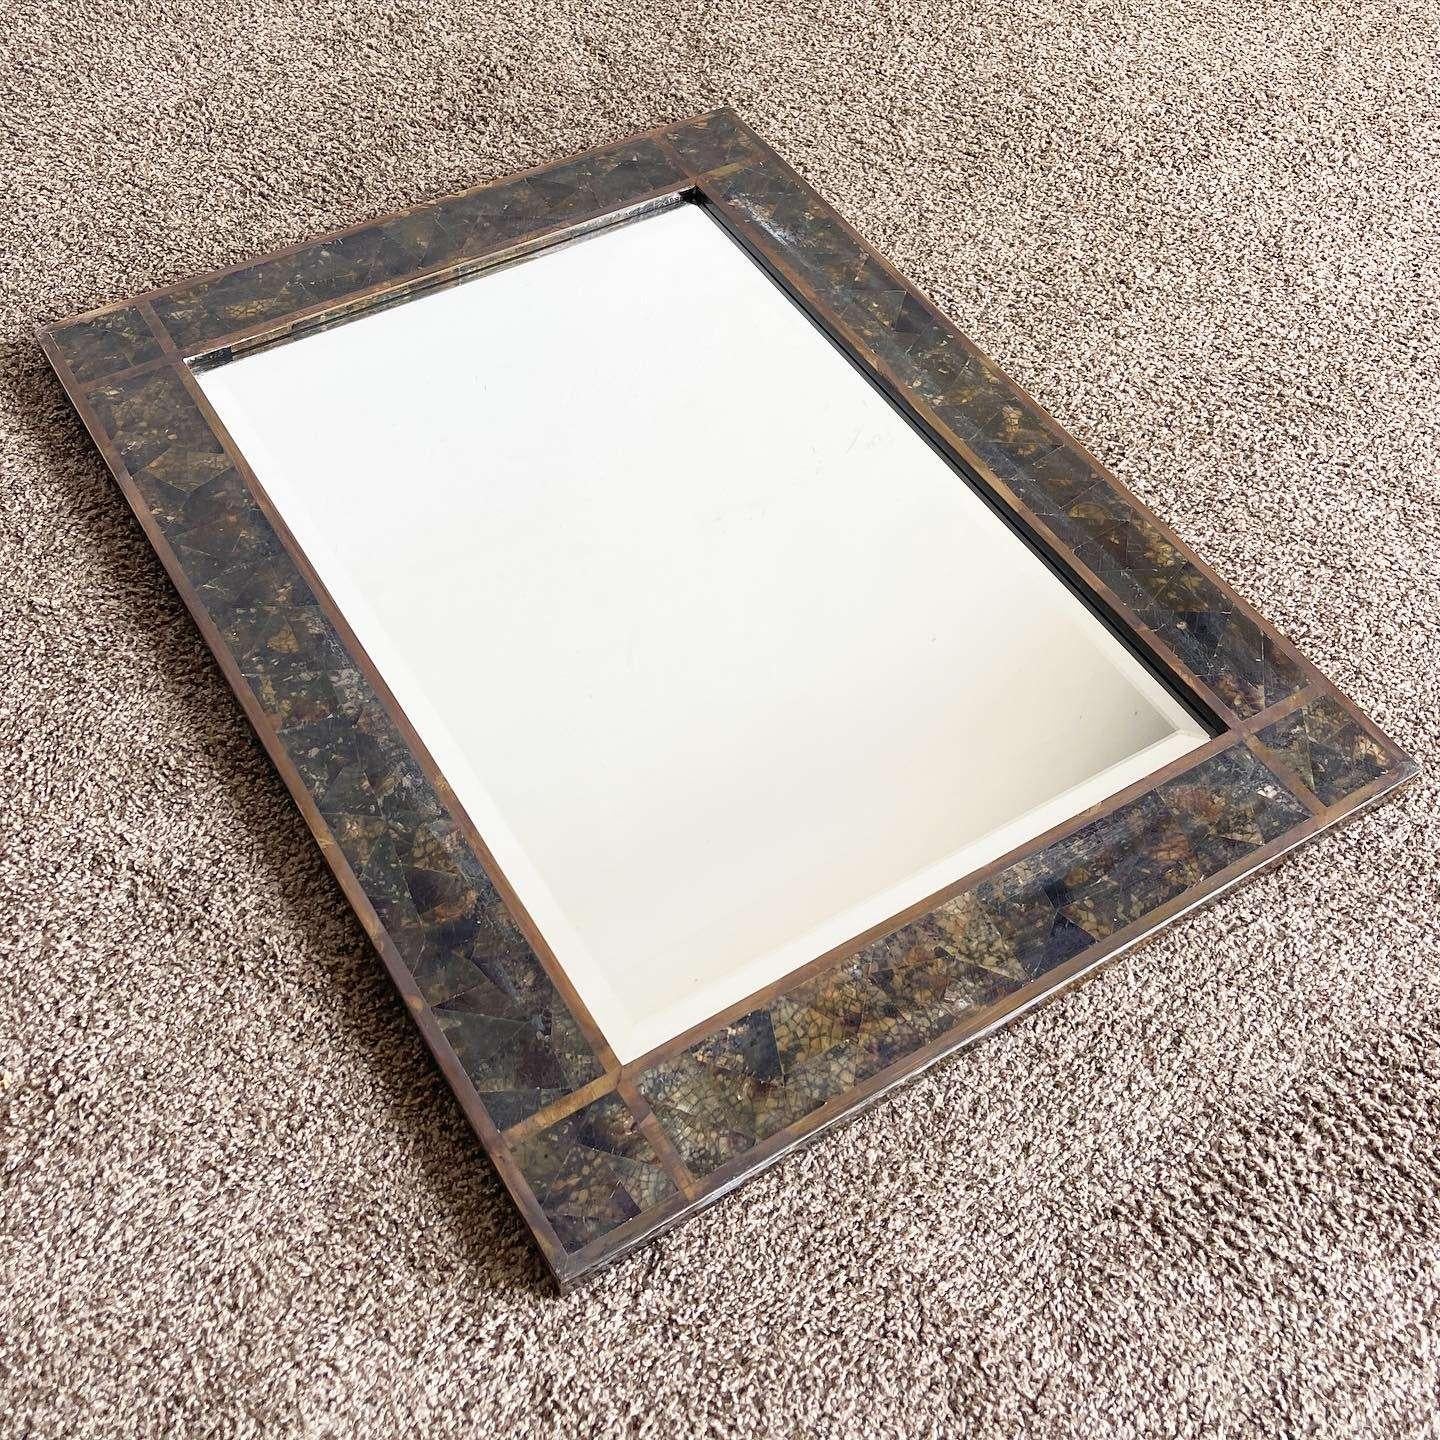 Wonderful vintage postmodern wall mirror designed by Maitland Smith. Features a tessellated stone frame with brass inlay.
